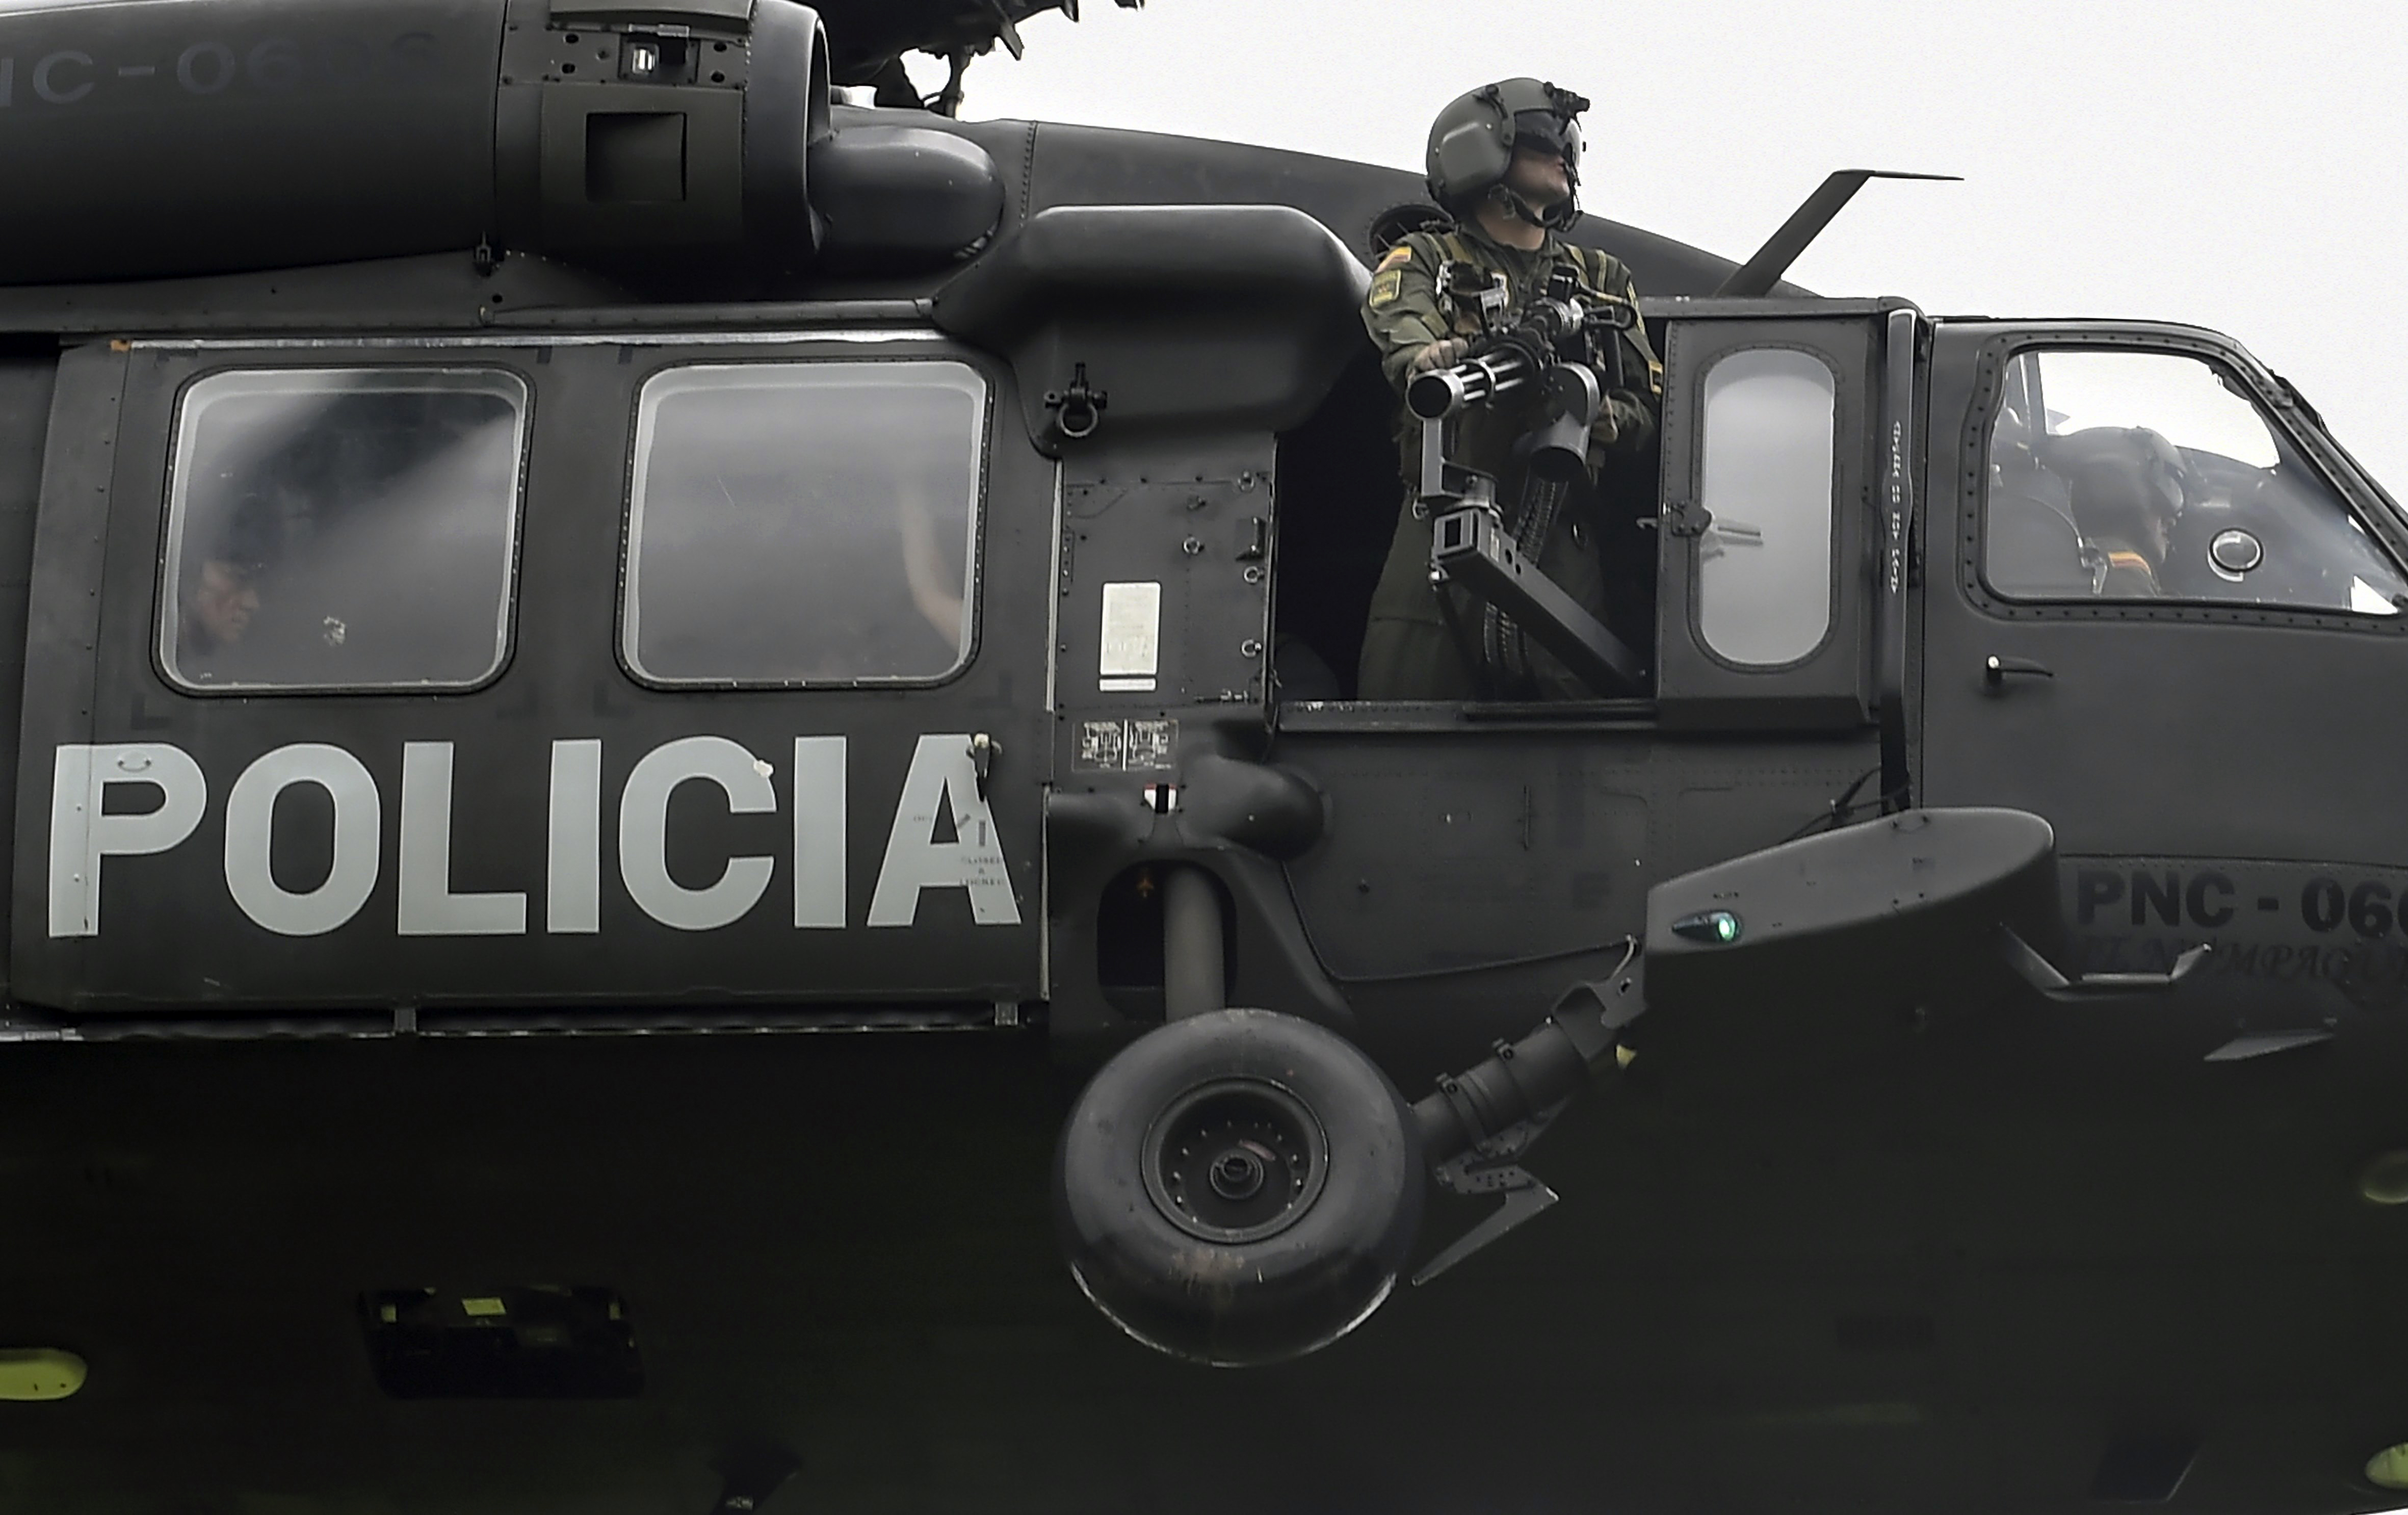 A helicopter used by Colombia's anti-narcotics police to throw pamphlets offering rewards for information leading to the capture of members of the Gulf Clan cartel overflies Apartado in Antioquia department, Colombia as part of the Agamemnon anti-drug trafficking operation on May 31, 2017. (RAUL ARBOLEDA&mdash;AFP/Getty Images)